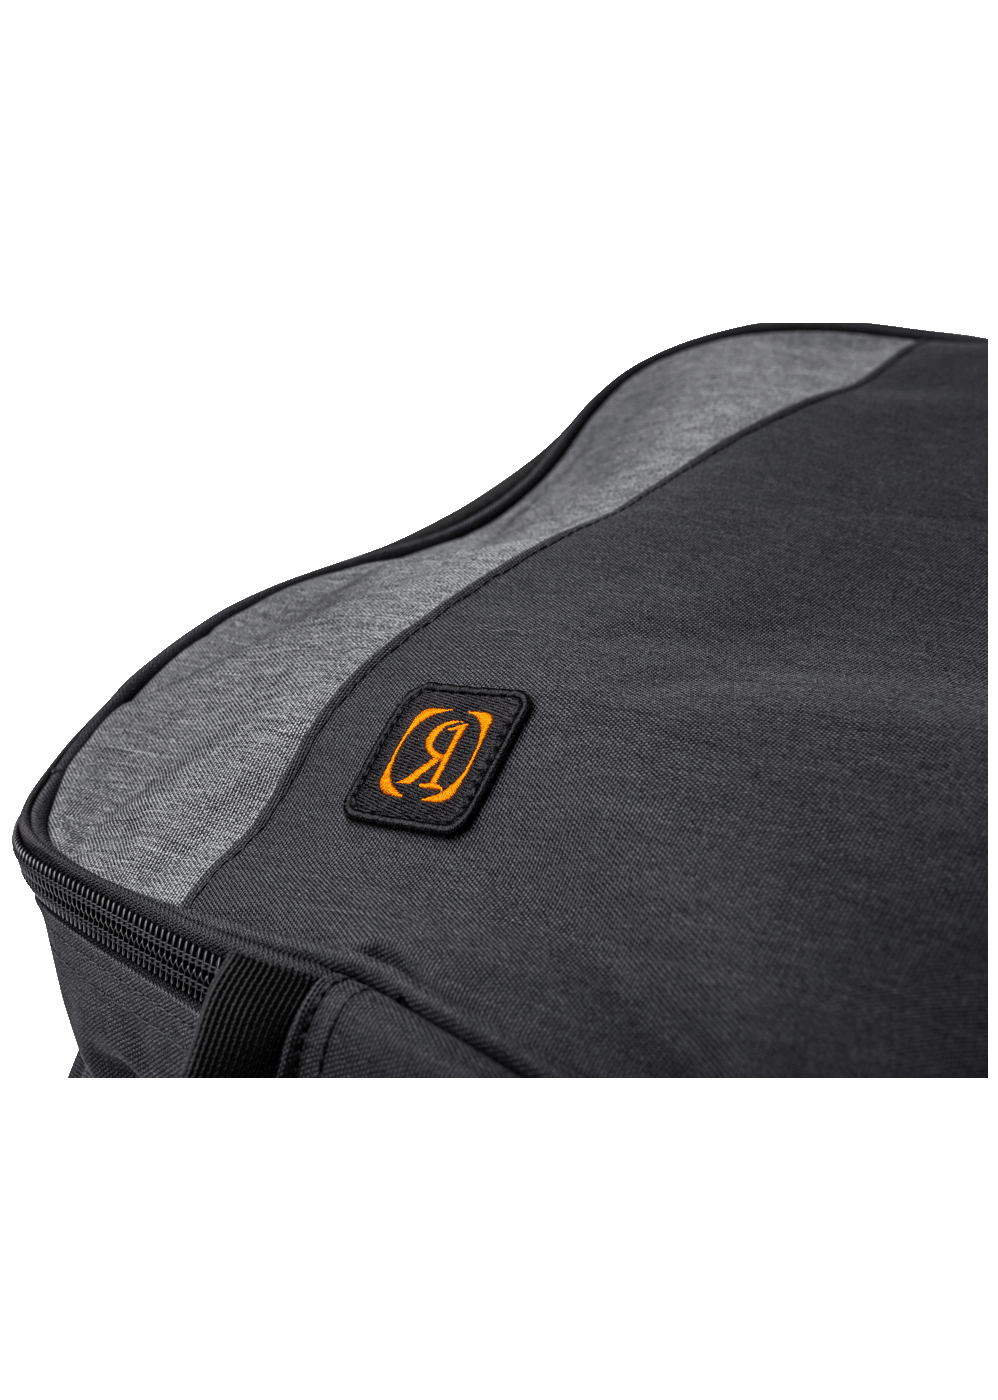 2022 Ronix Bags Squadron Padded Board Case Inset 5 copy